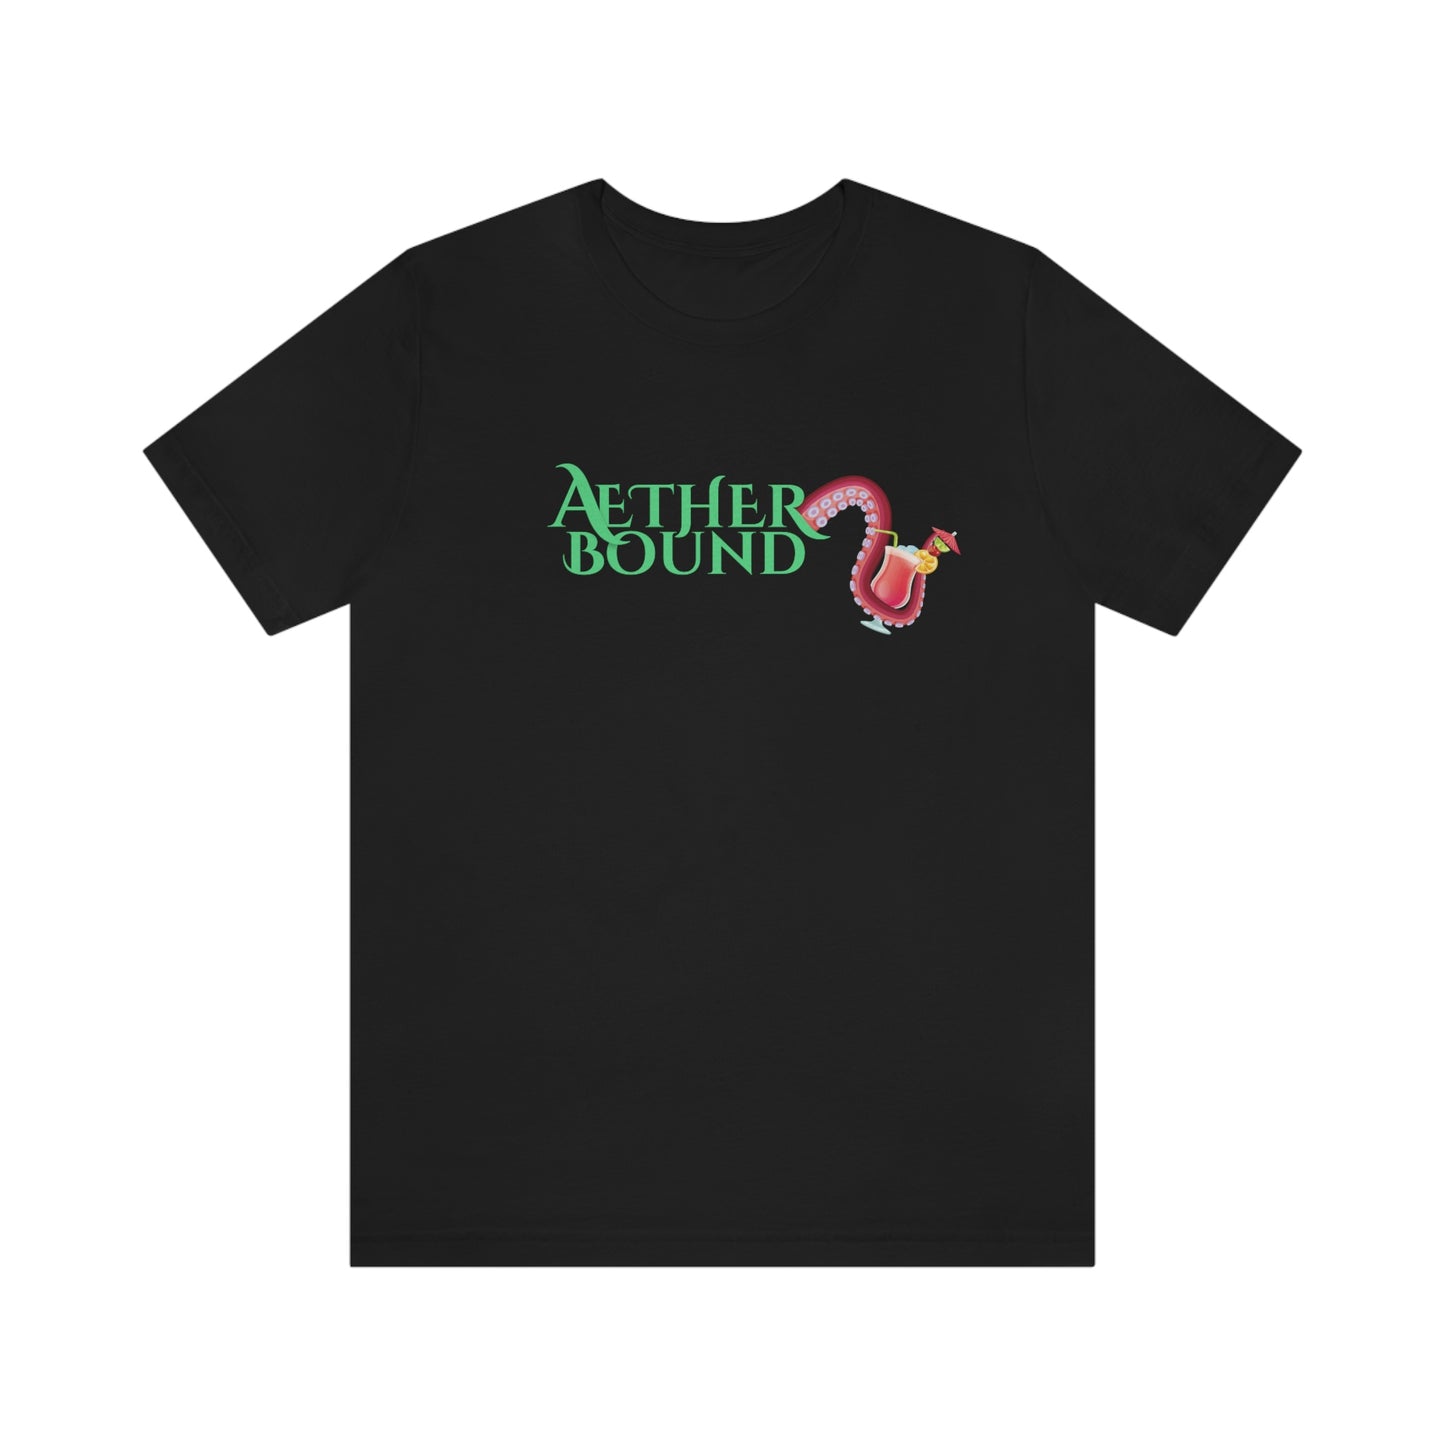 Aether Bound Tentacle Tee